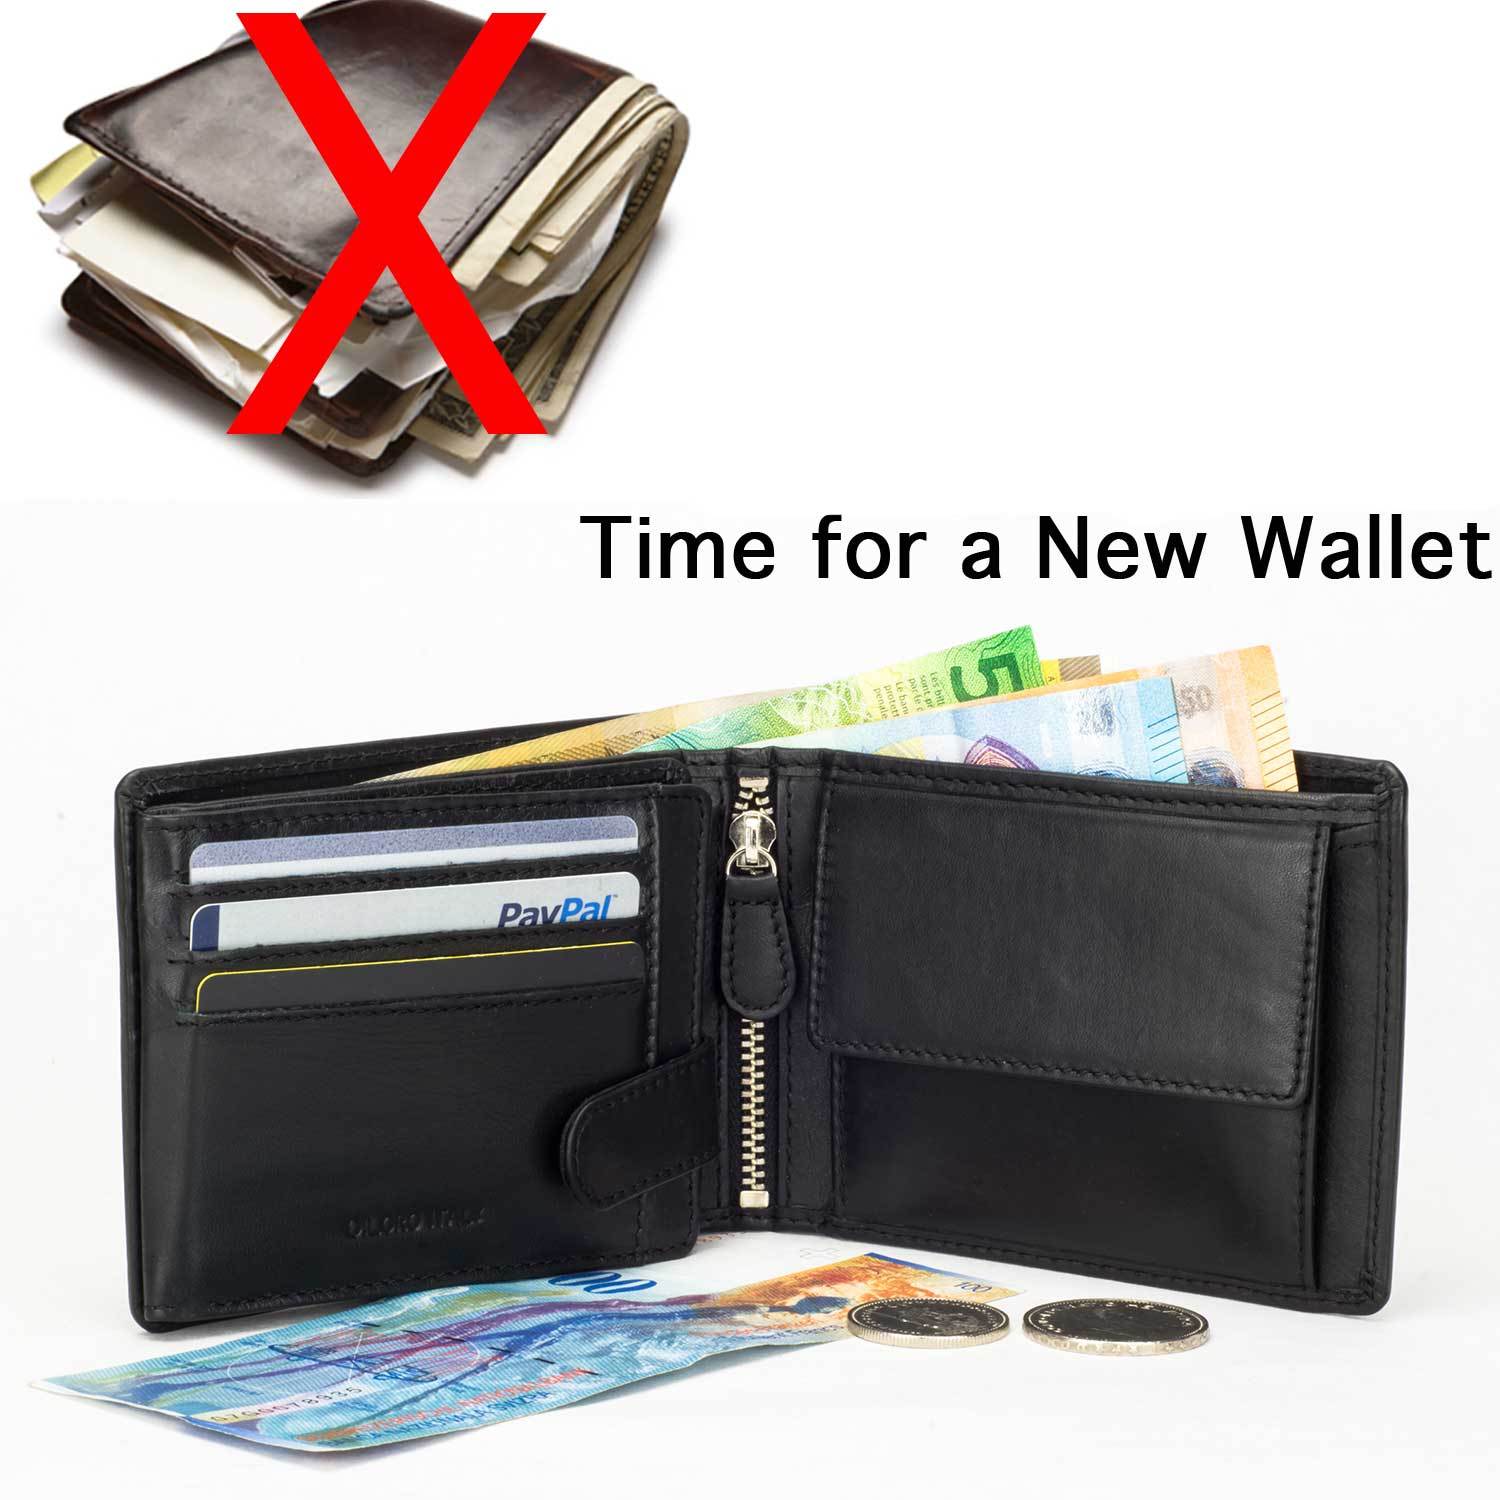 DiLoro Men's Leather Bifold Flip ID Zip Coin Wallet with RFID Protection in Black. Don't overstuff your wallet!